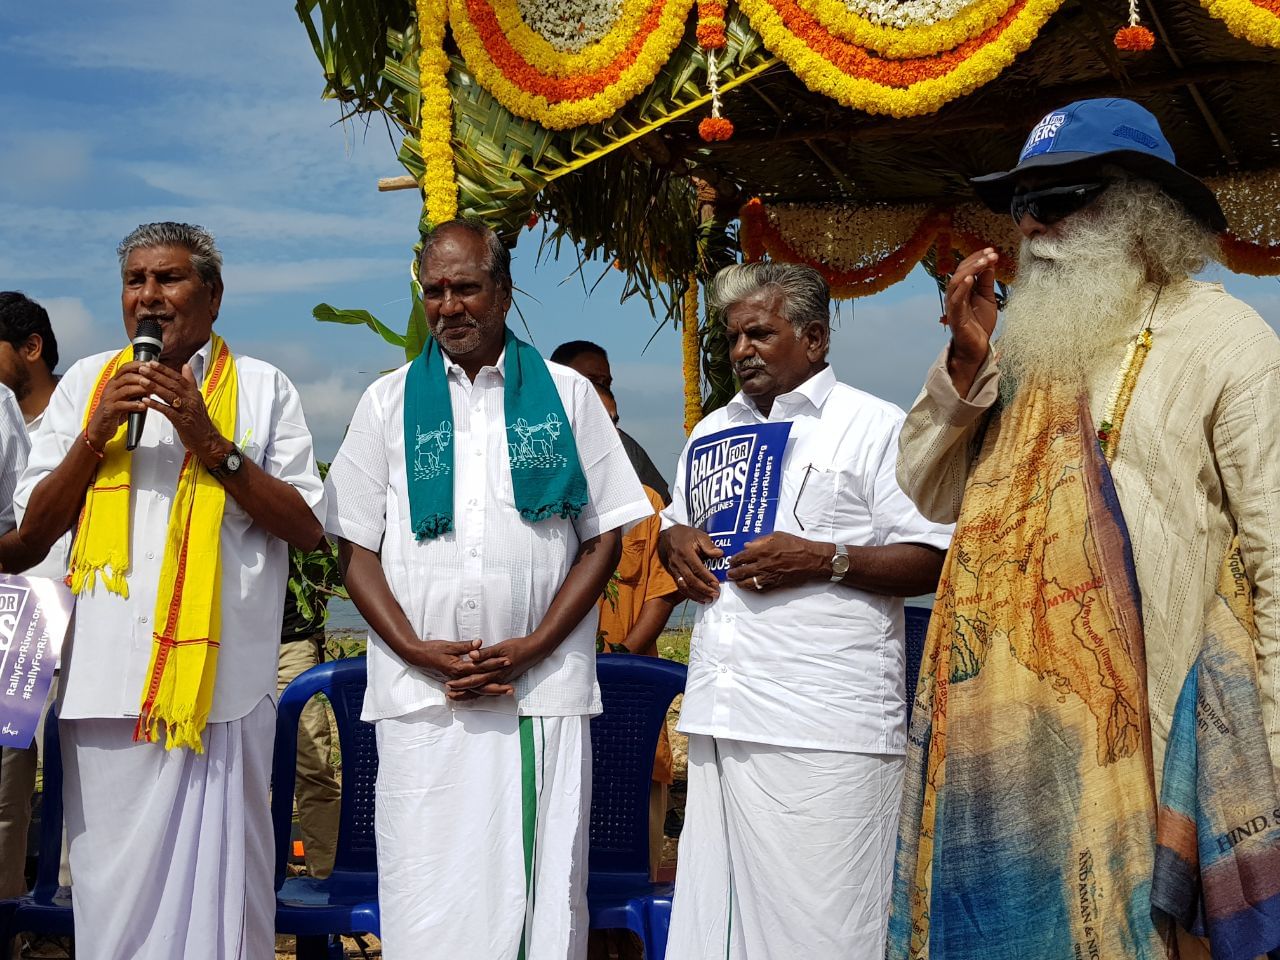 Farmers-meet-event-at-Mysuru-for-Rally-for-Rivers-6